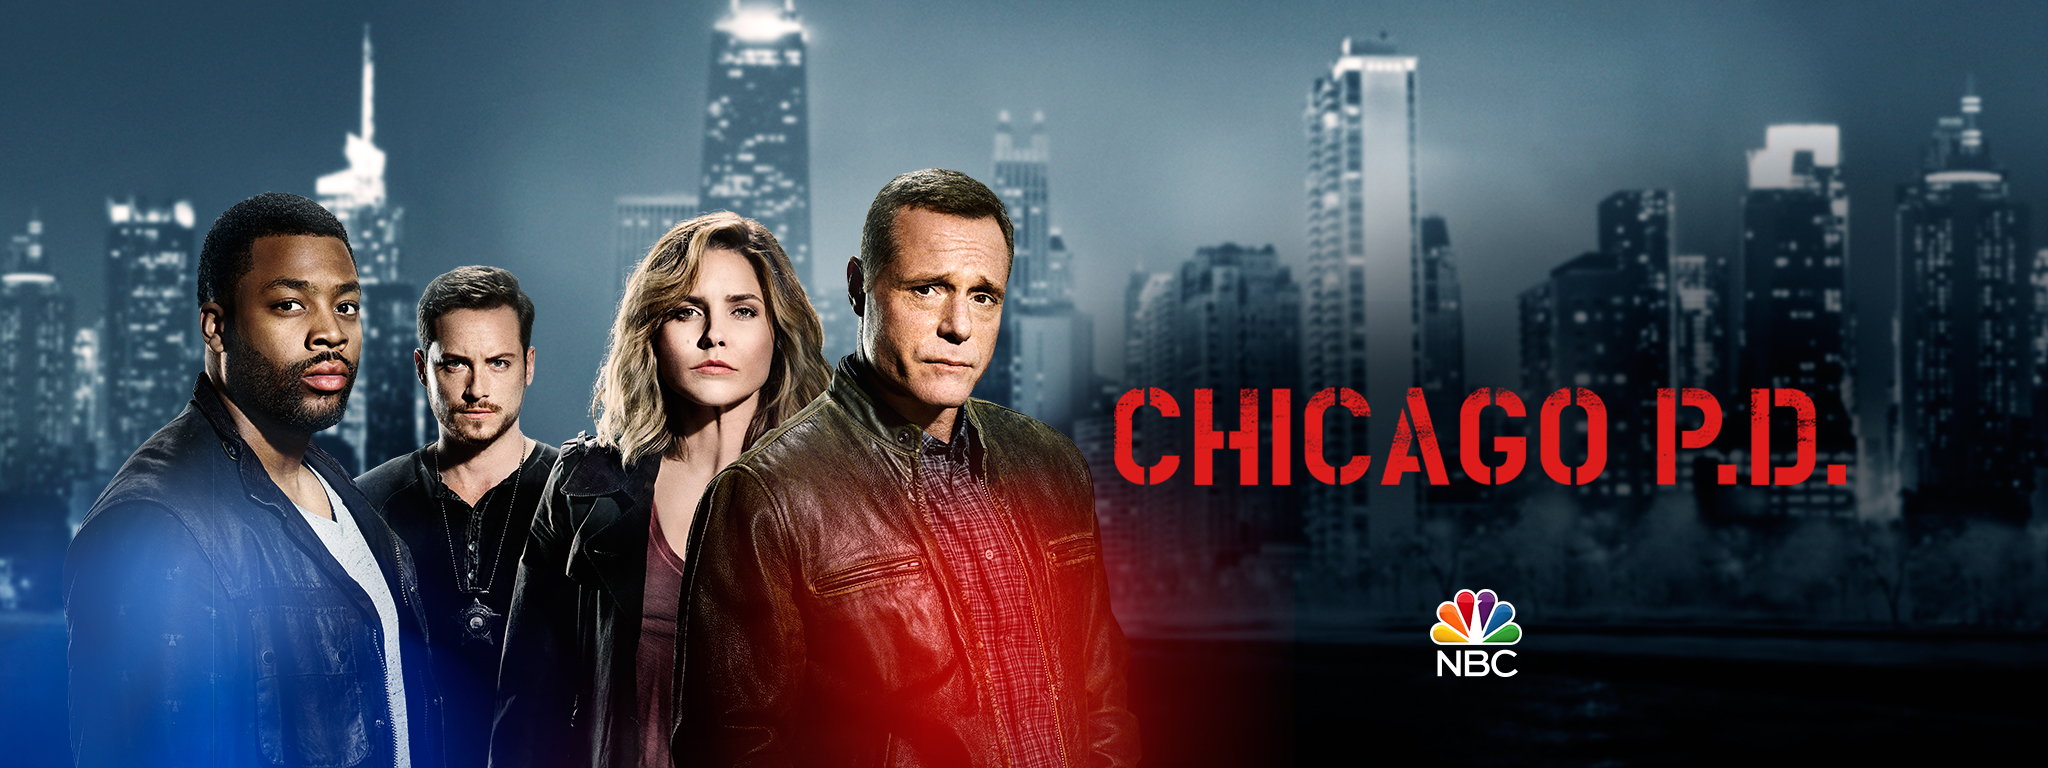 Nice Images Collection: Chicago P.D. Desktop Wallpapers